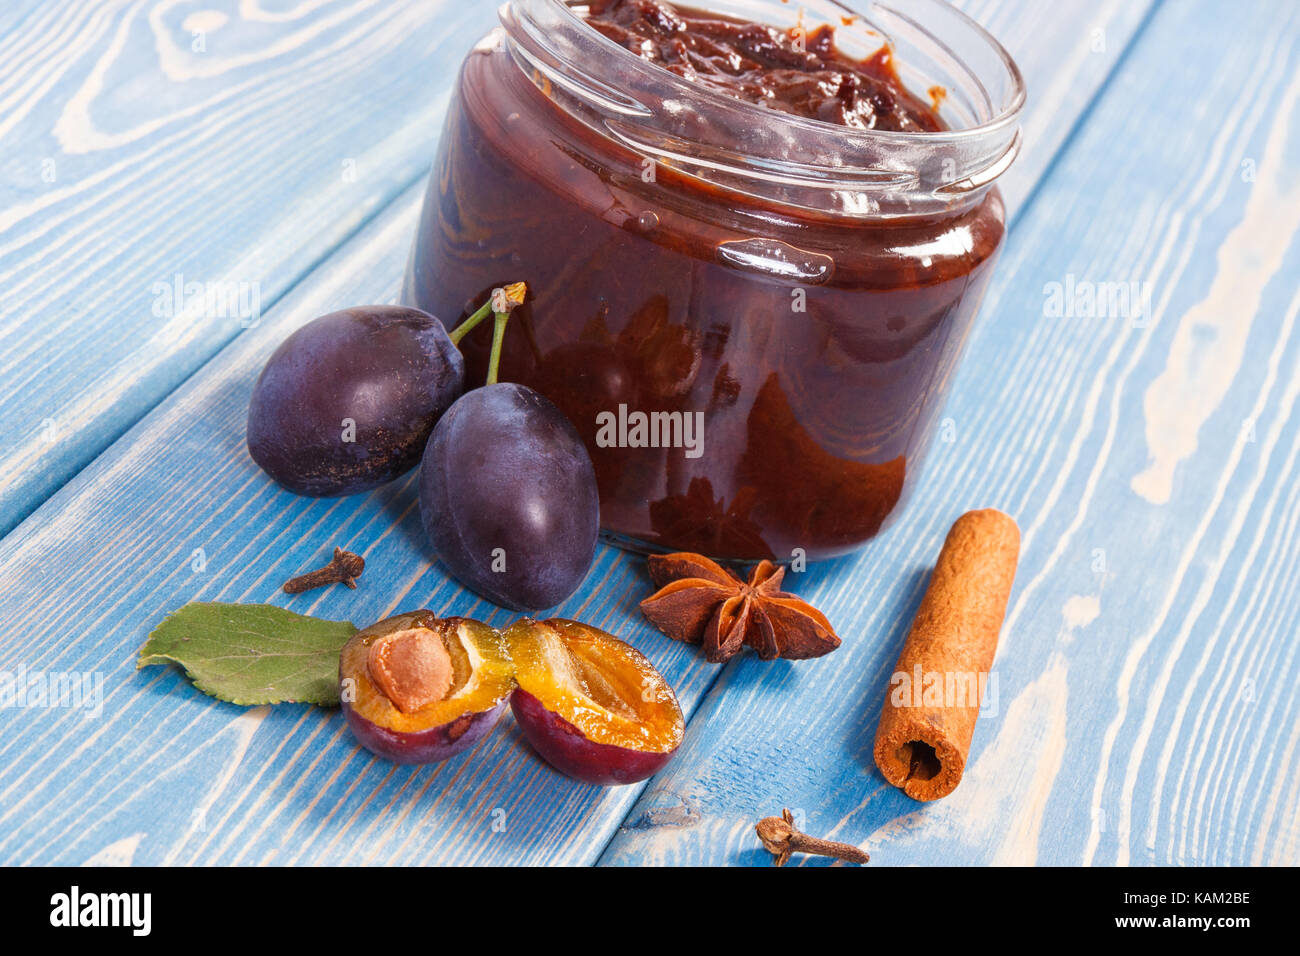 Fresh homemade plum marmalade in jar, ripe fruits and spices on wooden boards, concept of healthy sweet dessert Stock Photo